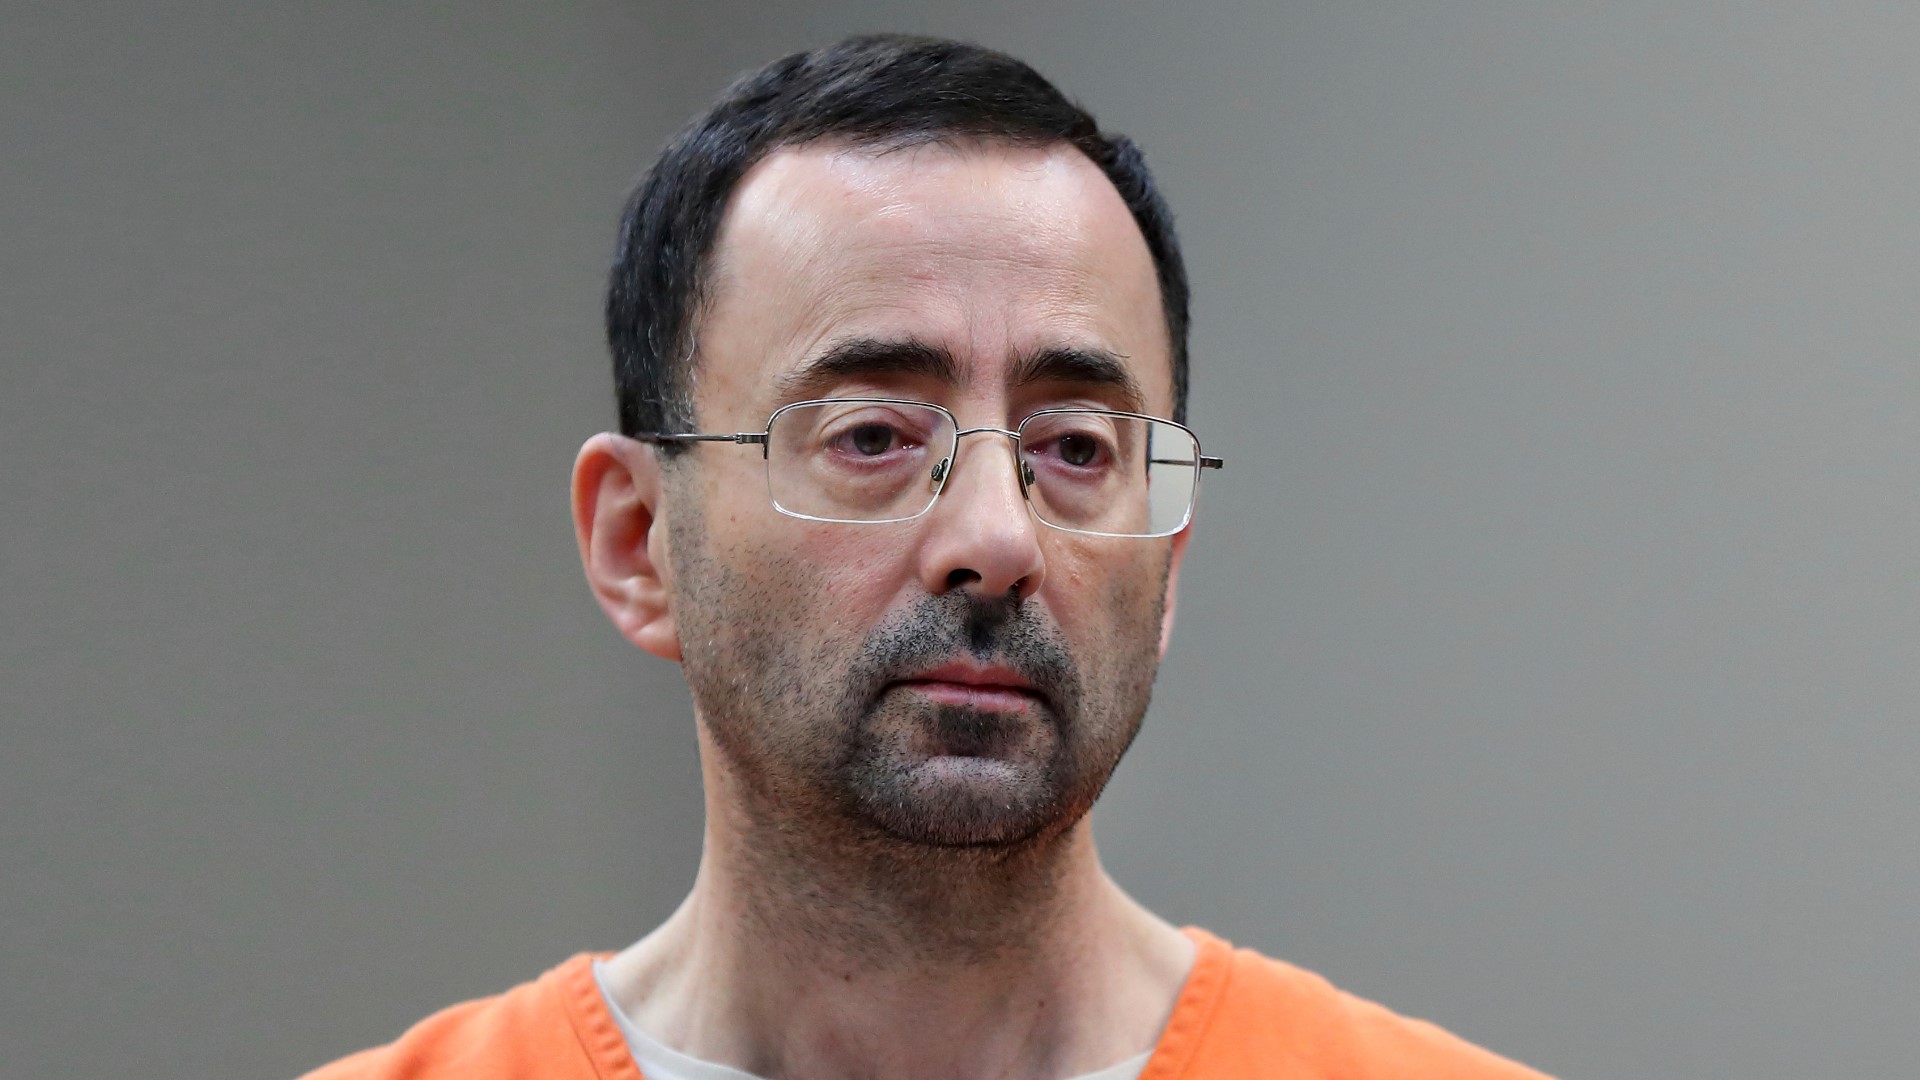 Disgraced sports doctor Larry Nassar has been stabbed multiple times during an altercation with another inmate at a federal prison in Florida.